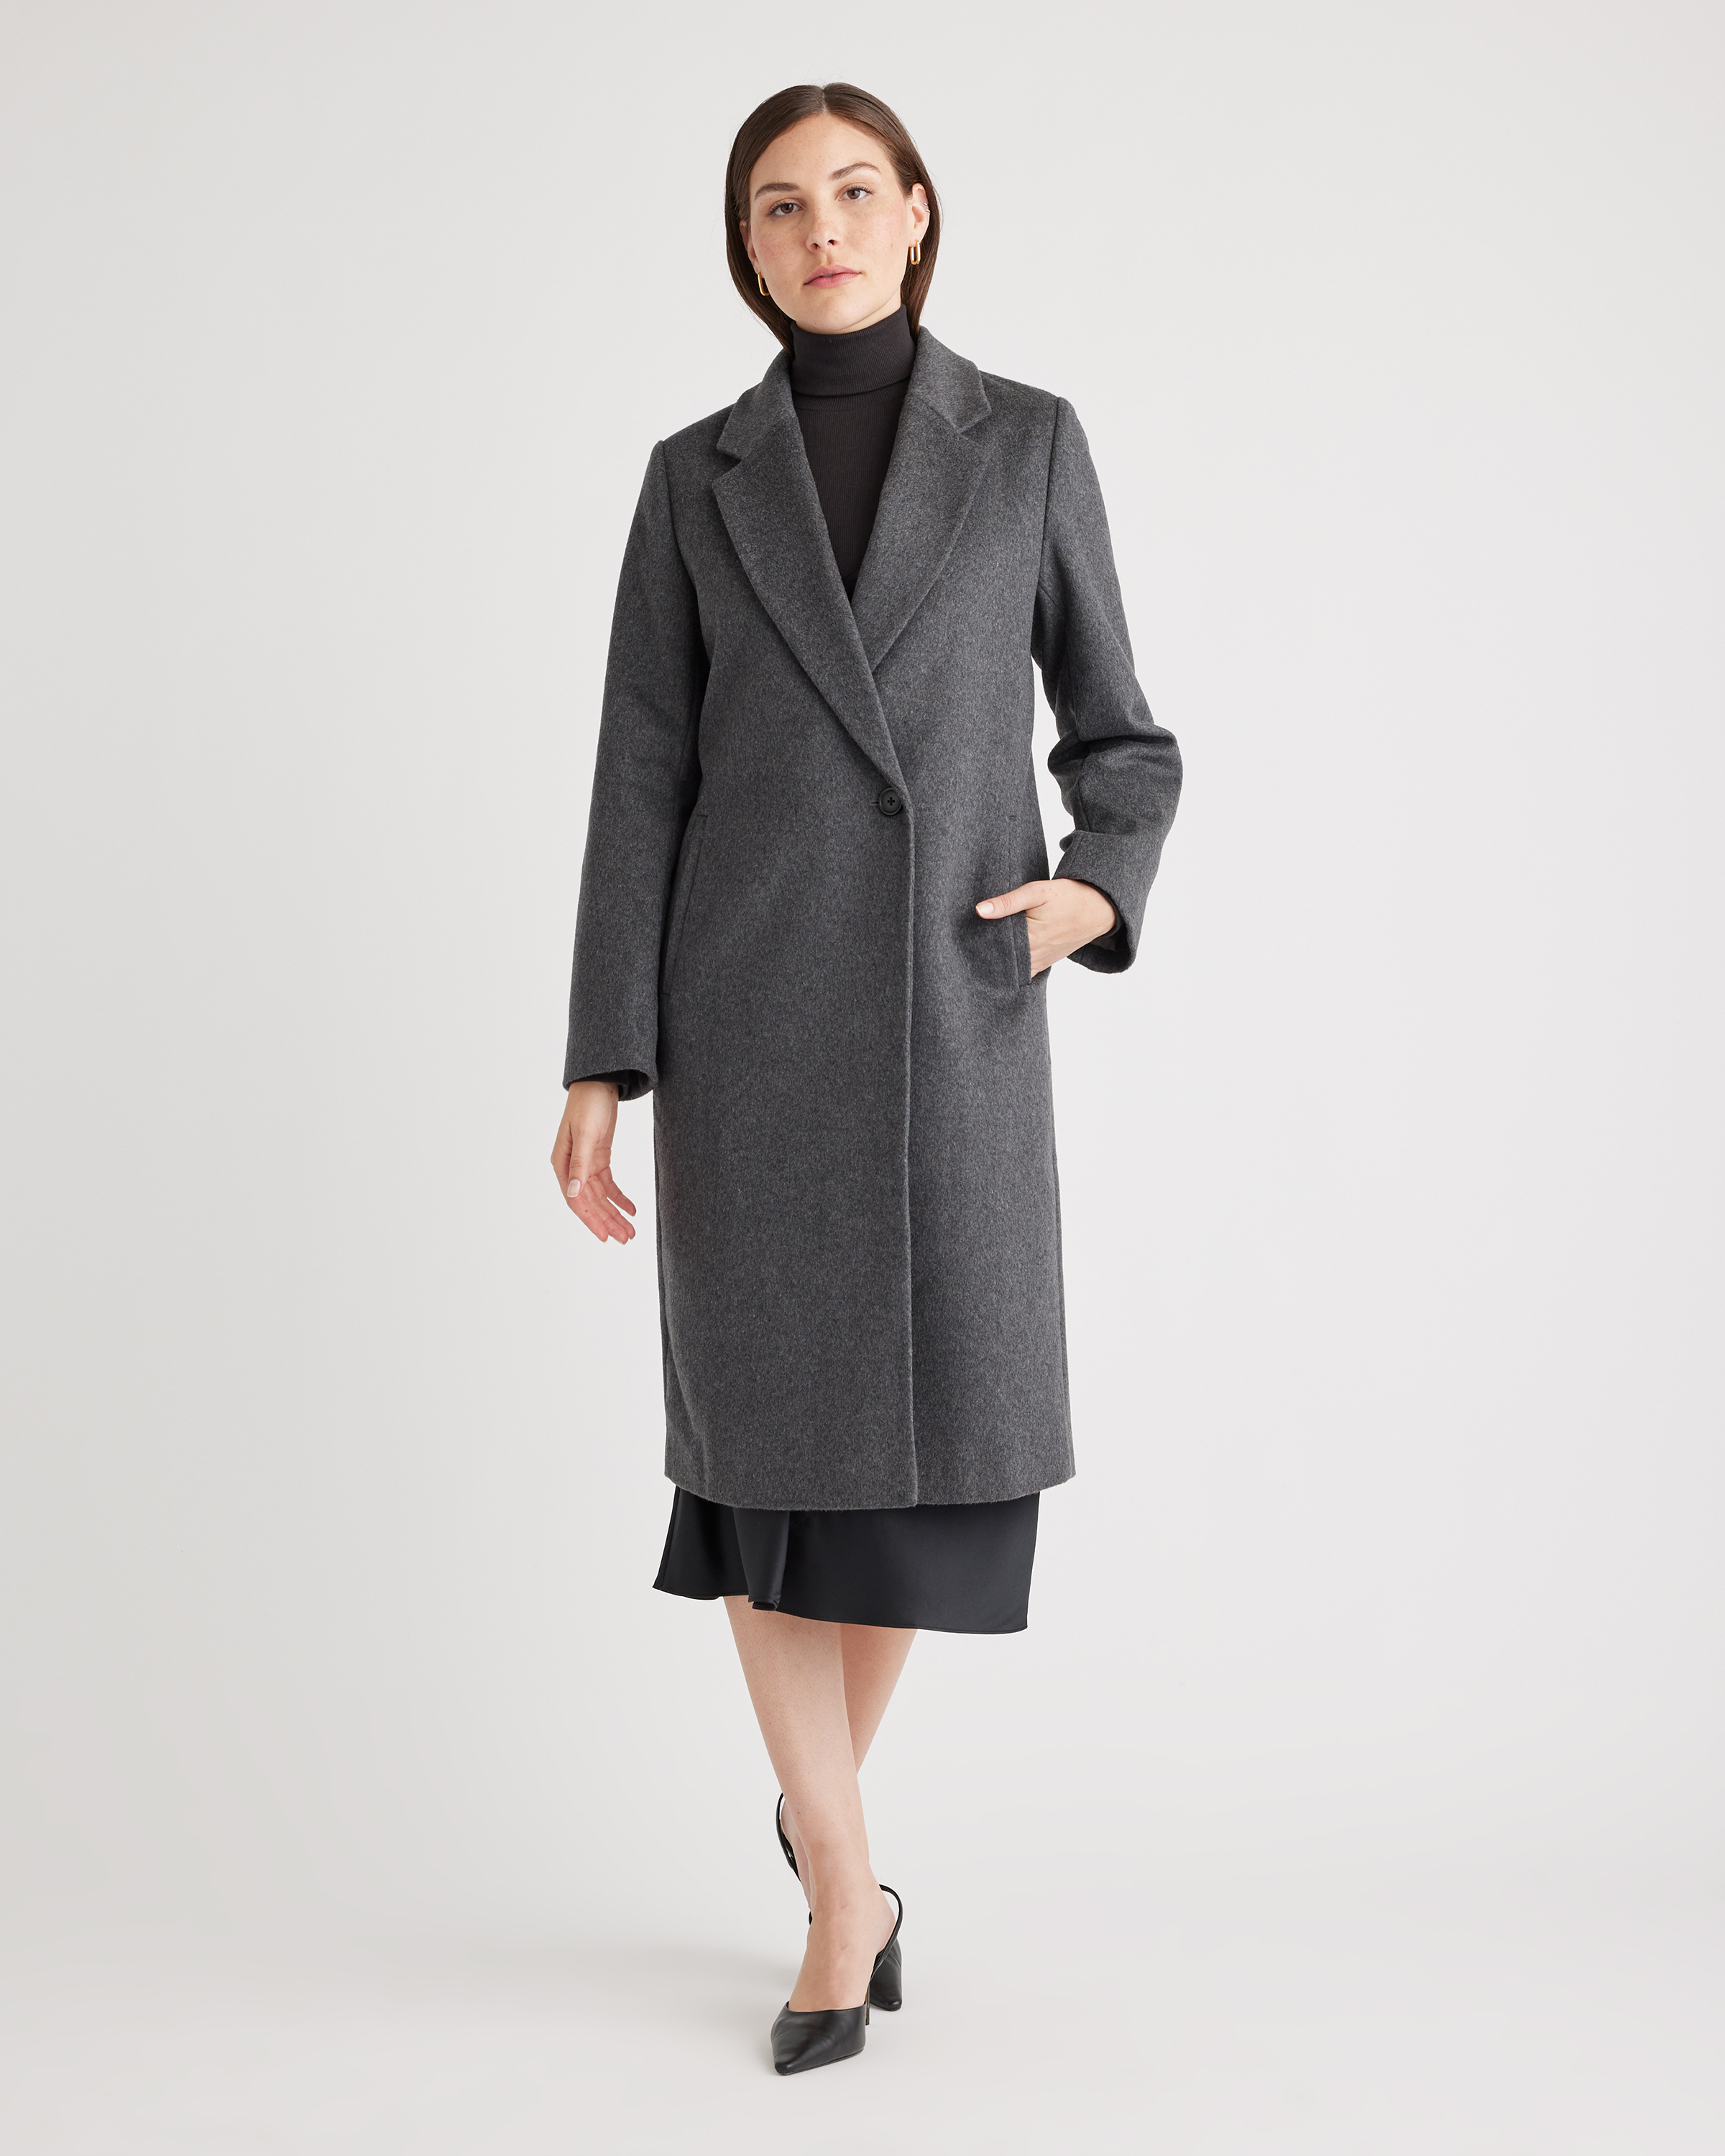 Baron Boutique Navy Wool Cashmere Coat Womens Tailored Single Breasted 